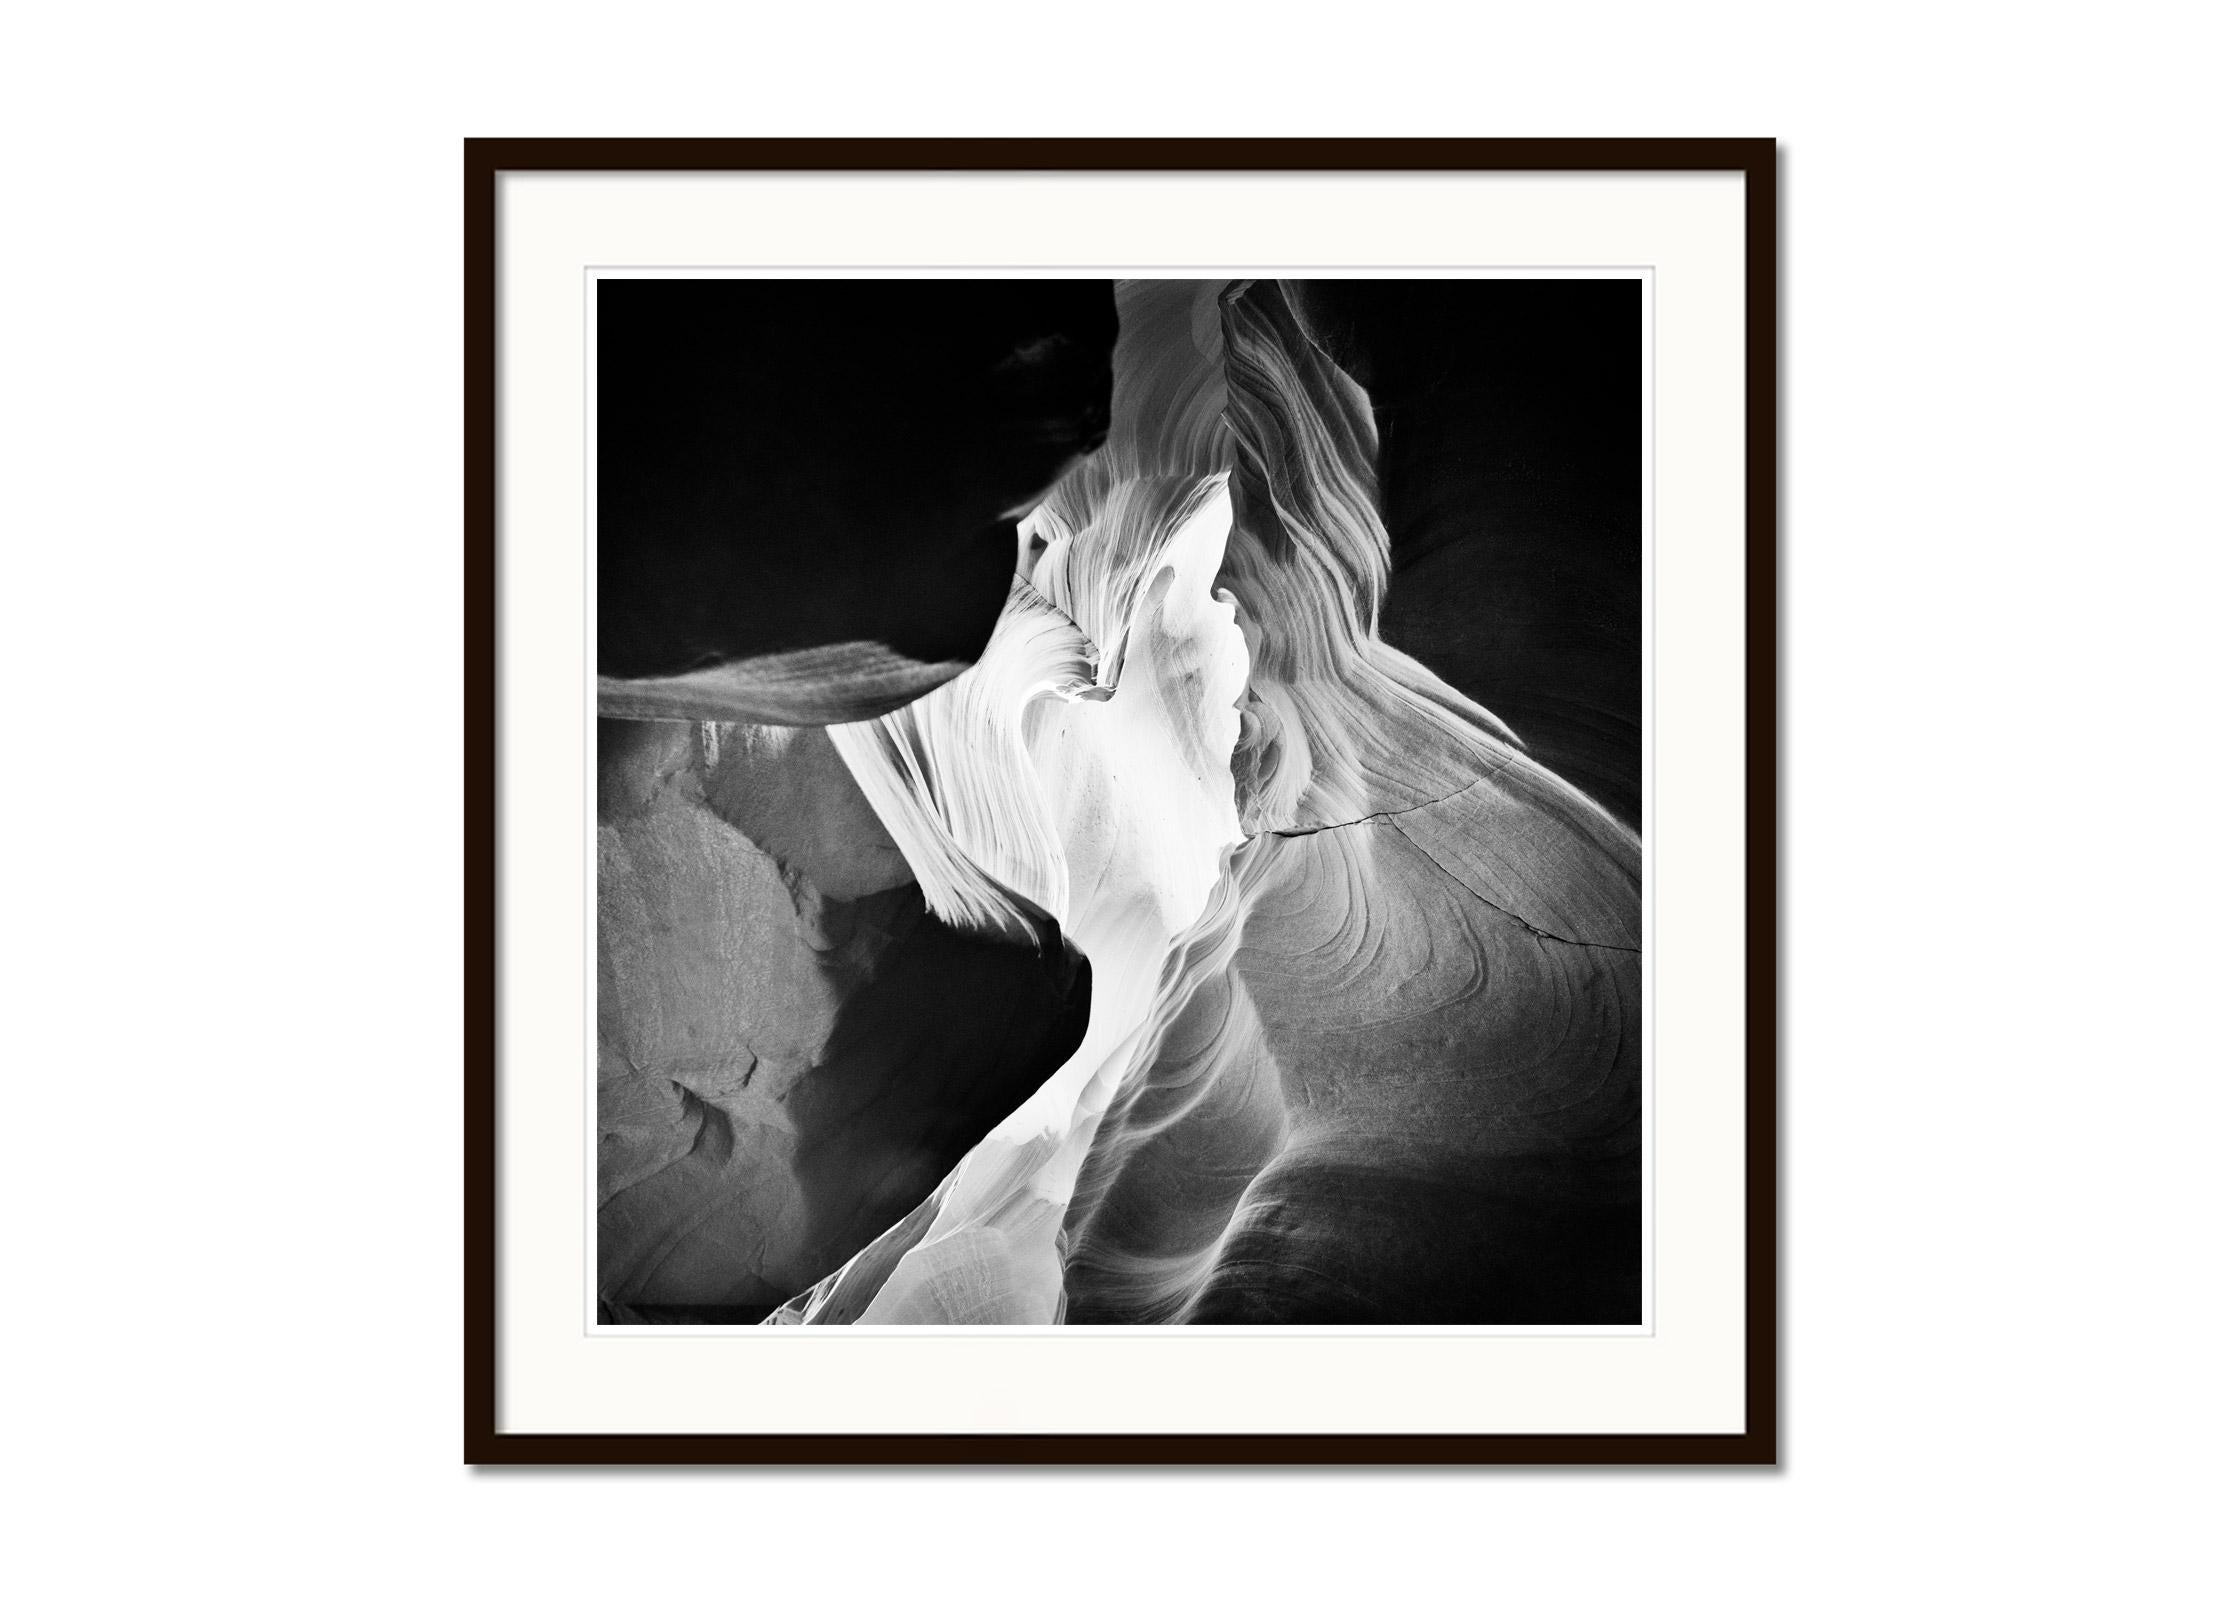 Black and white fine art landscape photography. Antelope Canyon sandstone formation detail, Page, Arizona, USA. Archival pigment ink print as part of a limited edition of 9. All Gerald Berghammer prints are made to order in limited editions on